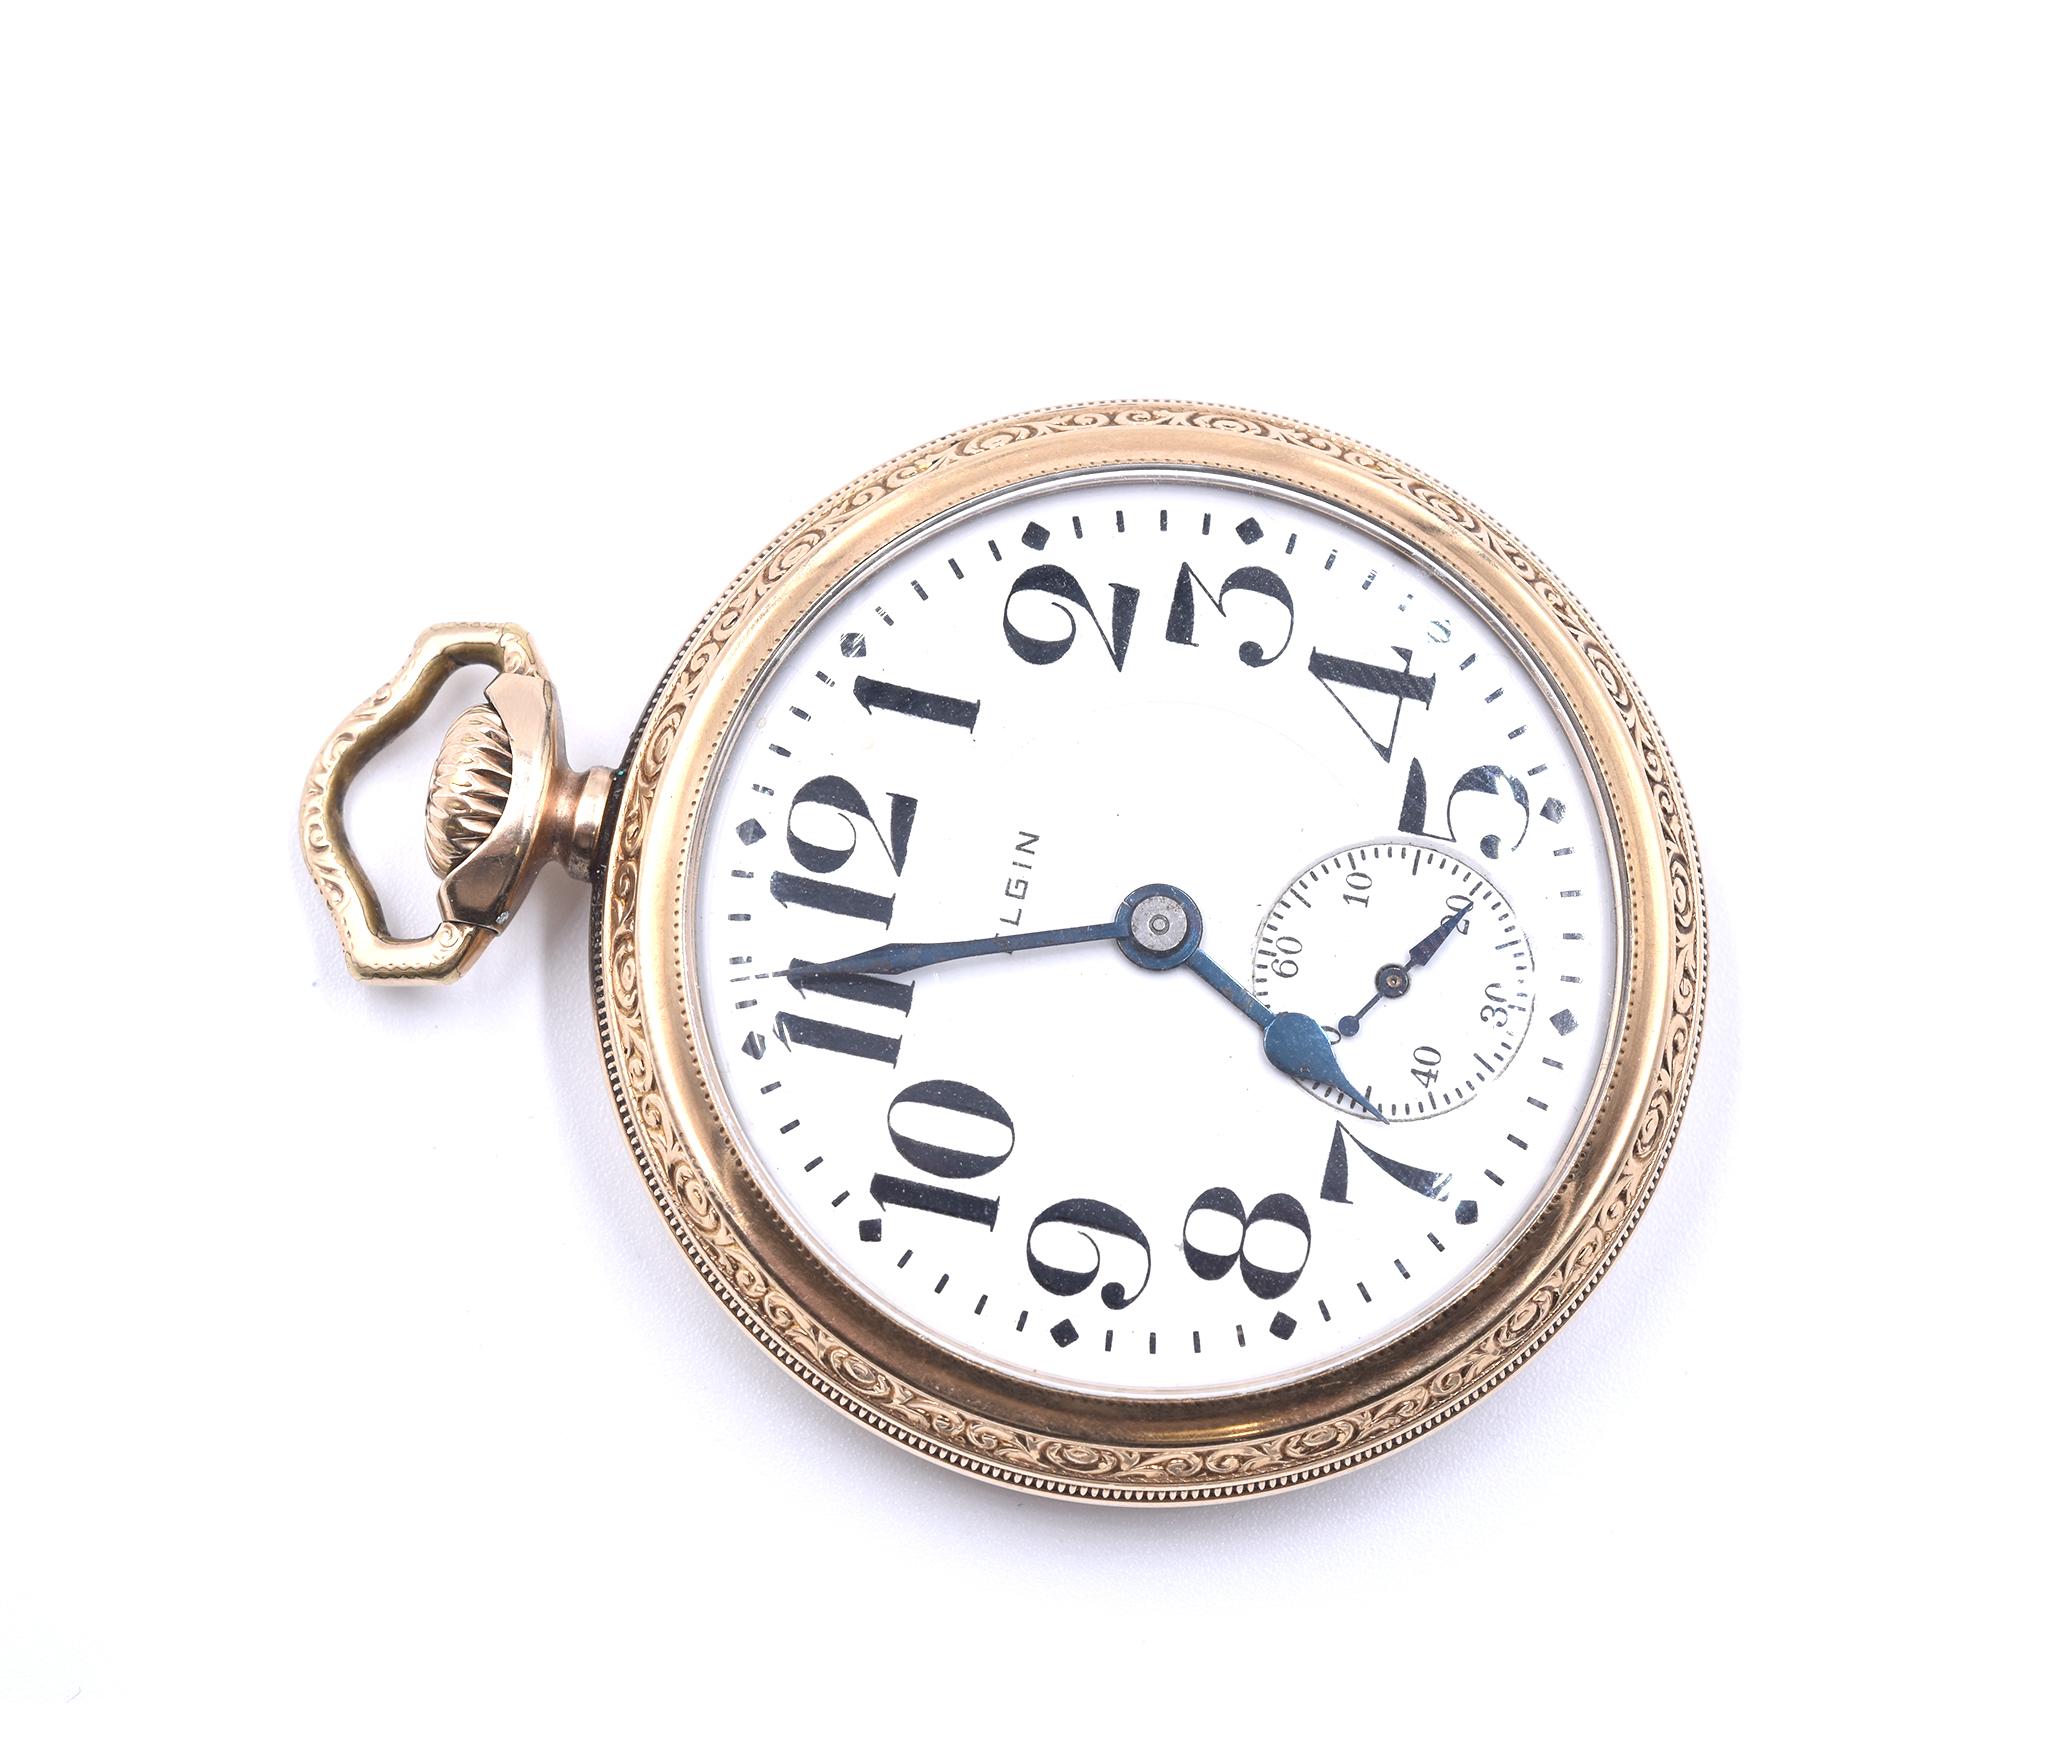 Movement: manual
Function: hours, minutes, seconds
Case: pocket watch
Dial: white roman dial
Case Serial # 391XXX
Movement Serial # 22556XXX

No box or papers. 
Guaranteed to be authentic by seller.
